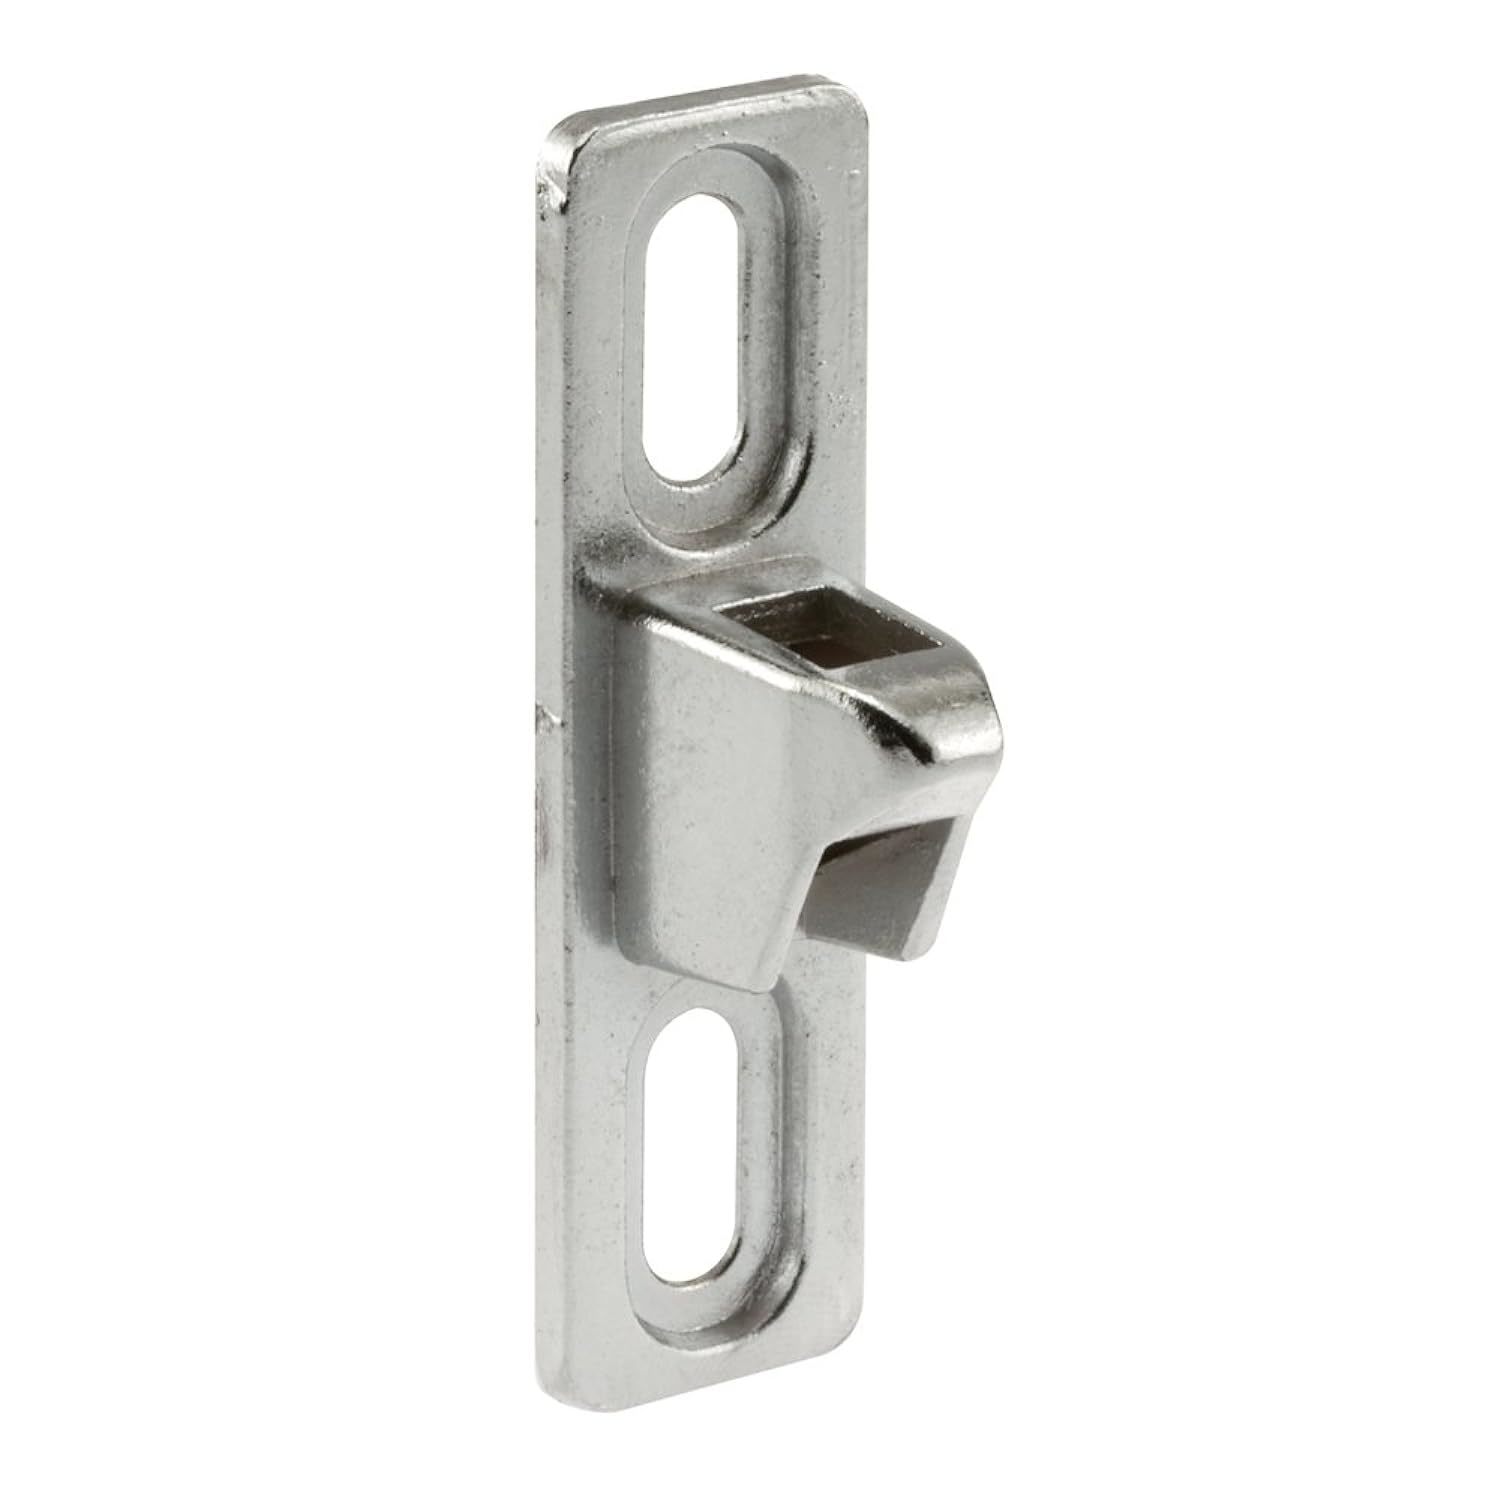 Primary image for Prime-Line E 2040 Chrome Plated Diecast, Sliding Door Keeper (Single Pack)